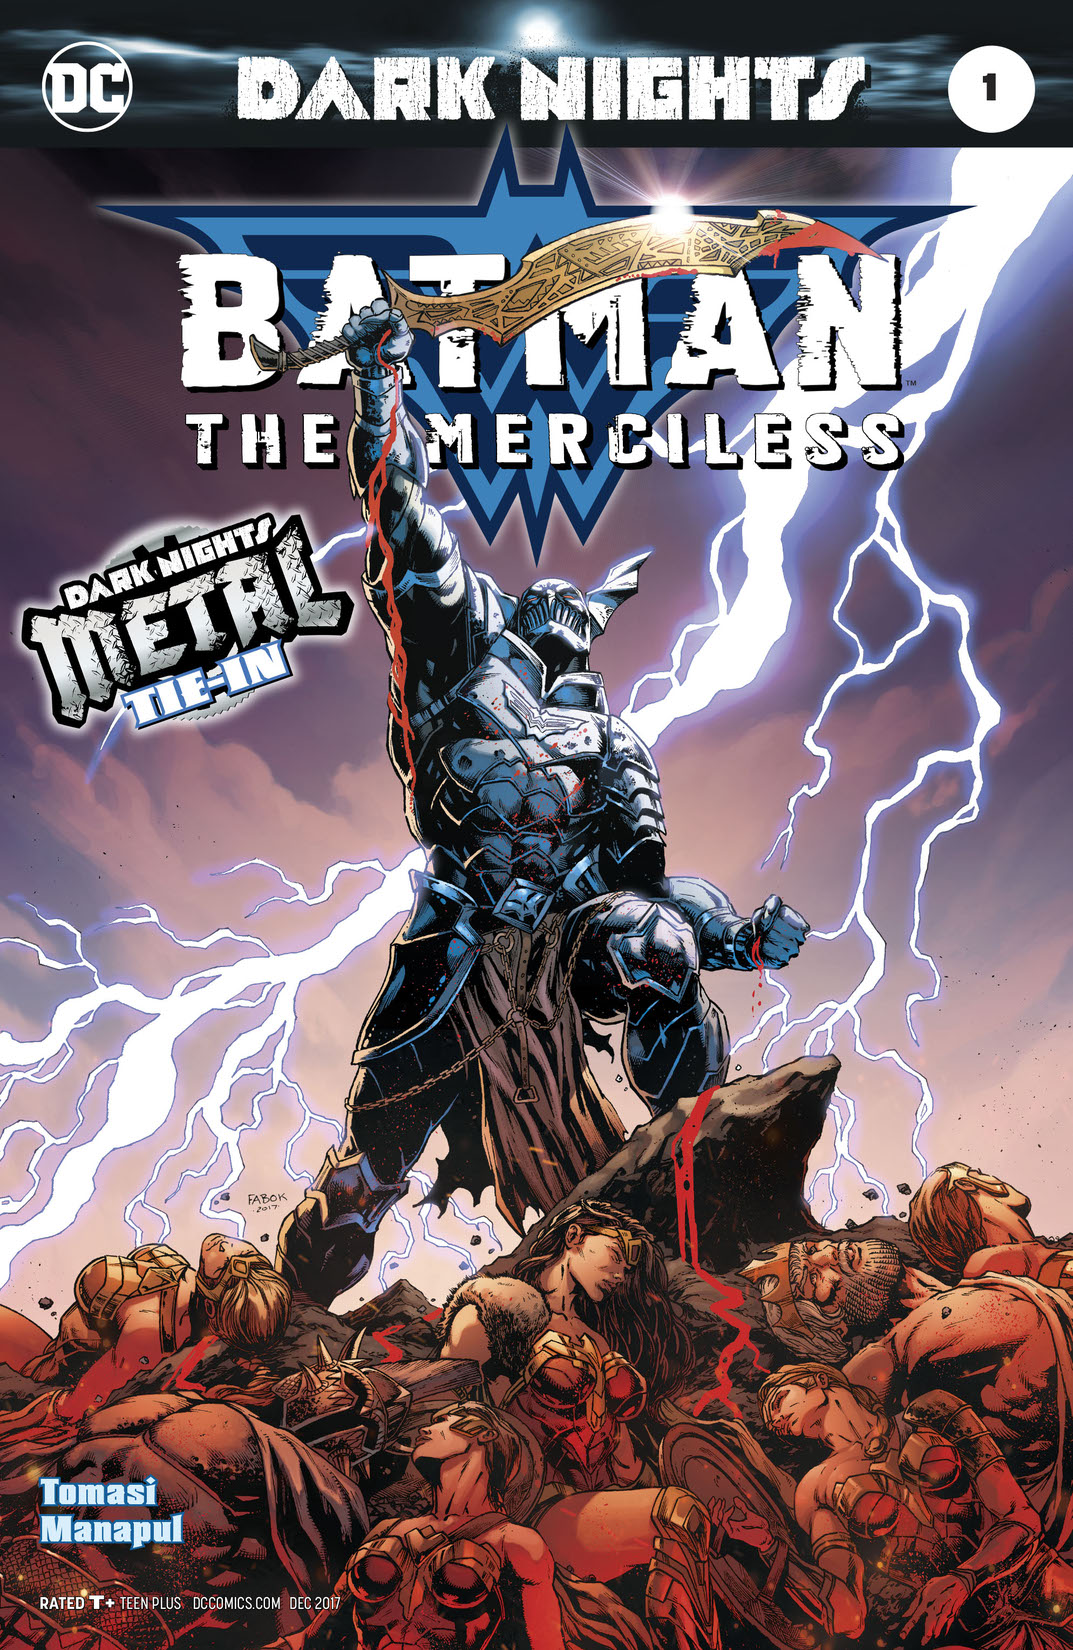 Batman: The Merciless #1 preview images